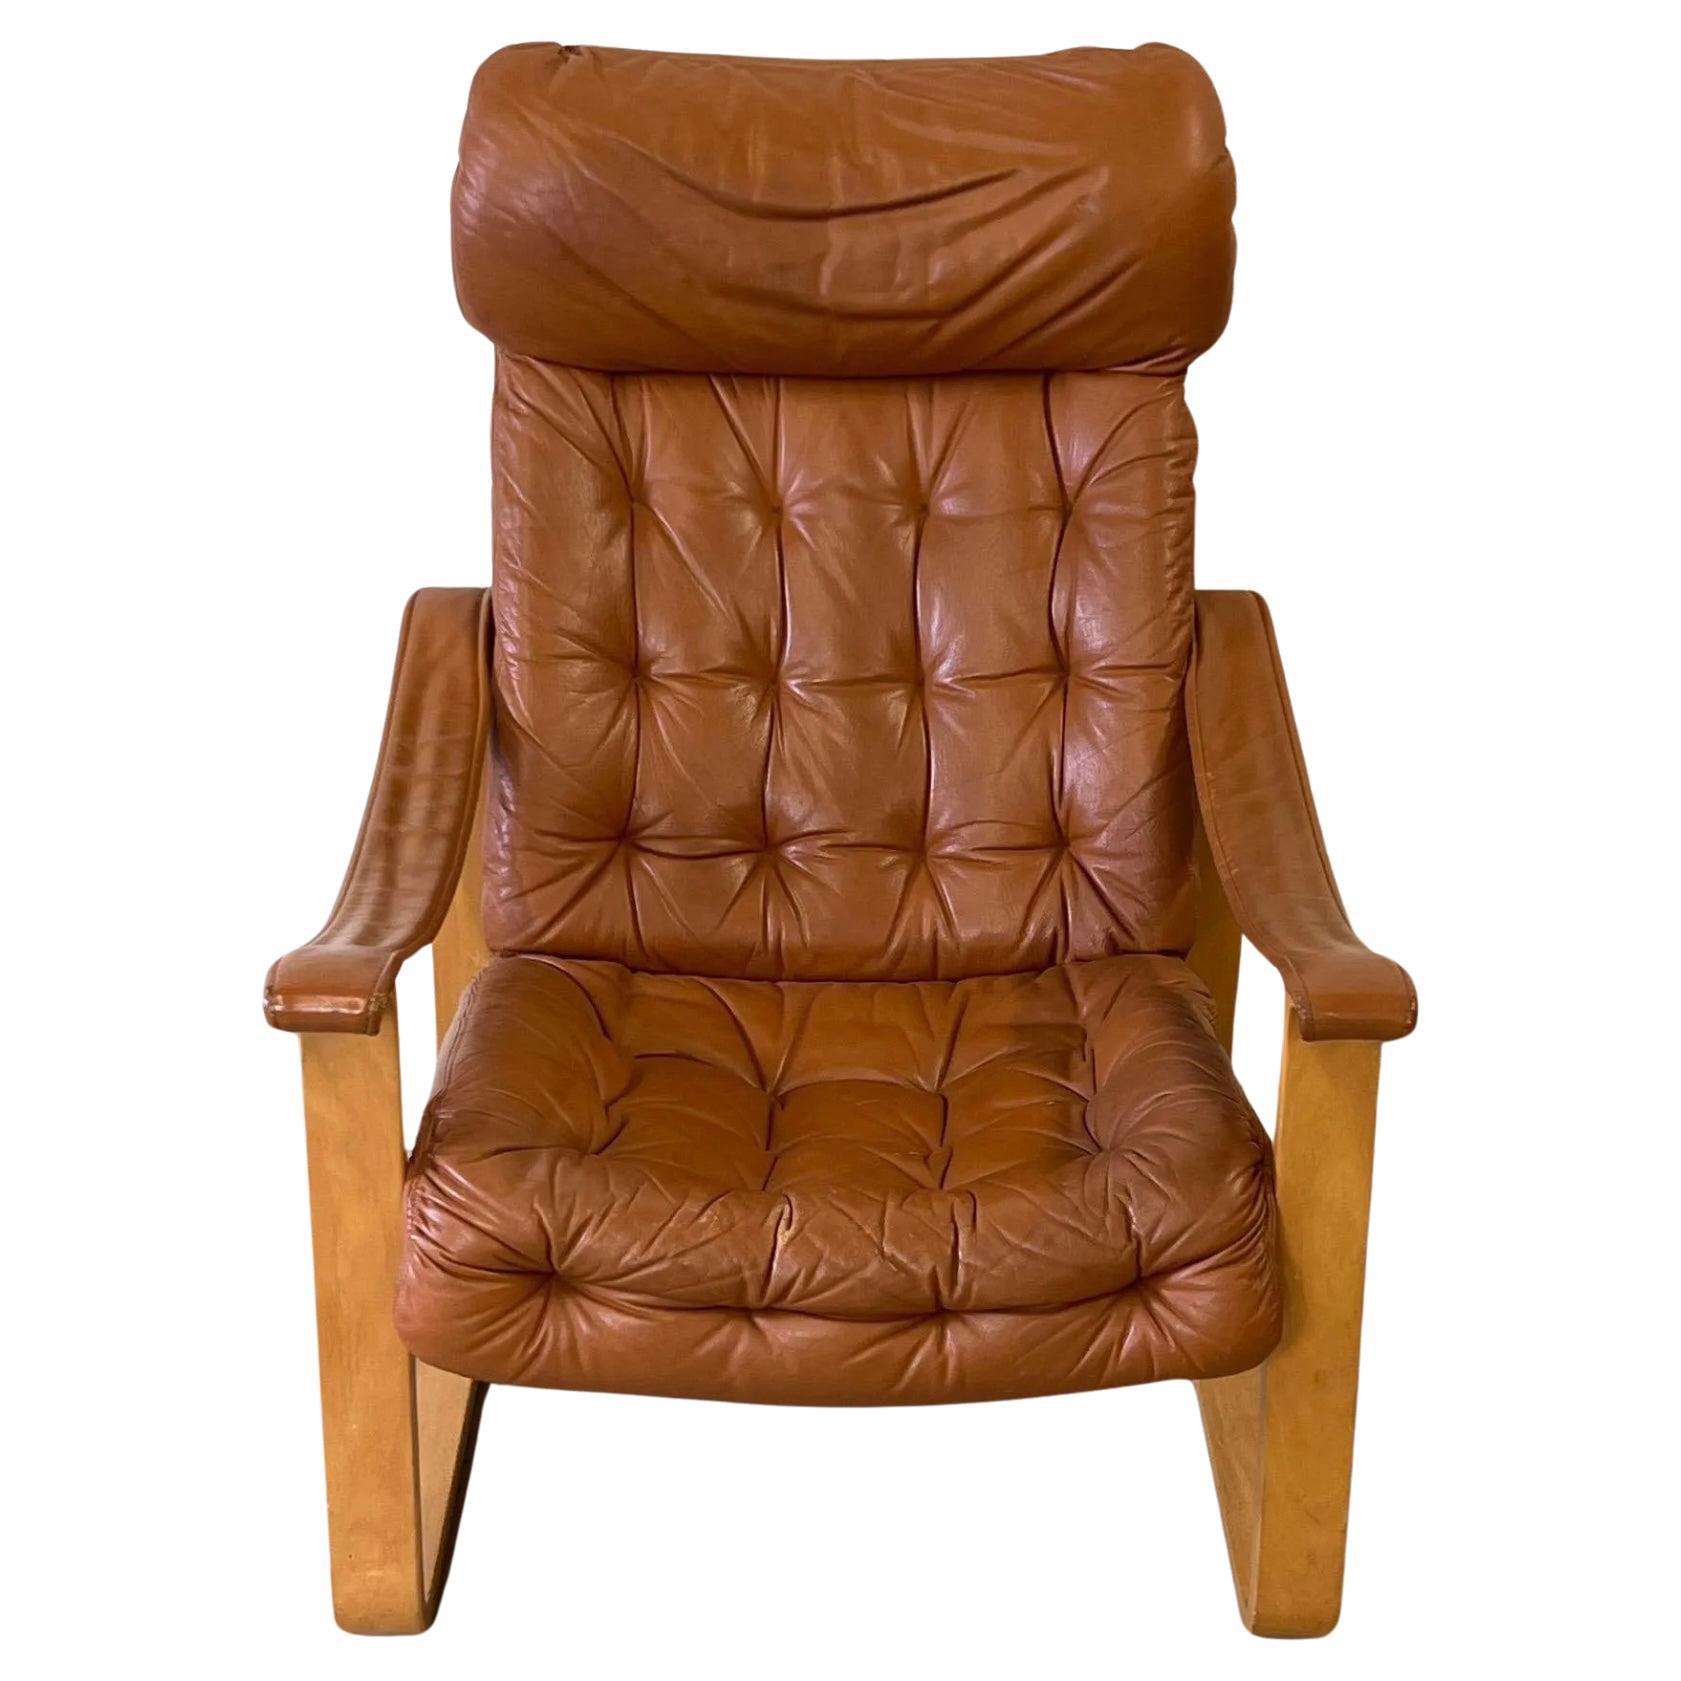 A leather sling lounge chair designed by Bjarne (BJ) Dahlqvist for Oy BD-Mobel Ab. This 1970s Finnish chair features a blonde bentwood frame, tufted leather seat and backrest, a leather headrest, leather sling armrests. Made in Finland. Located in